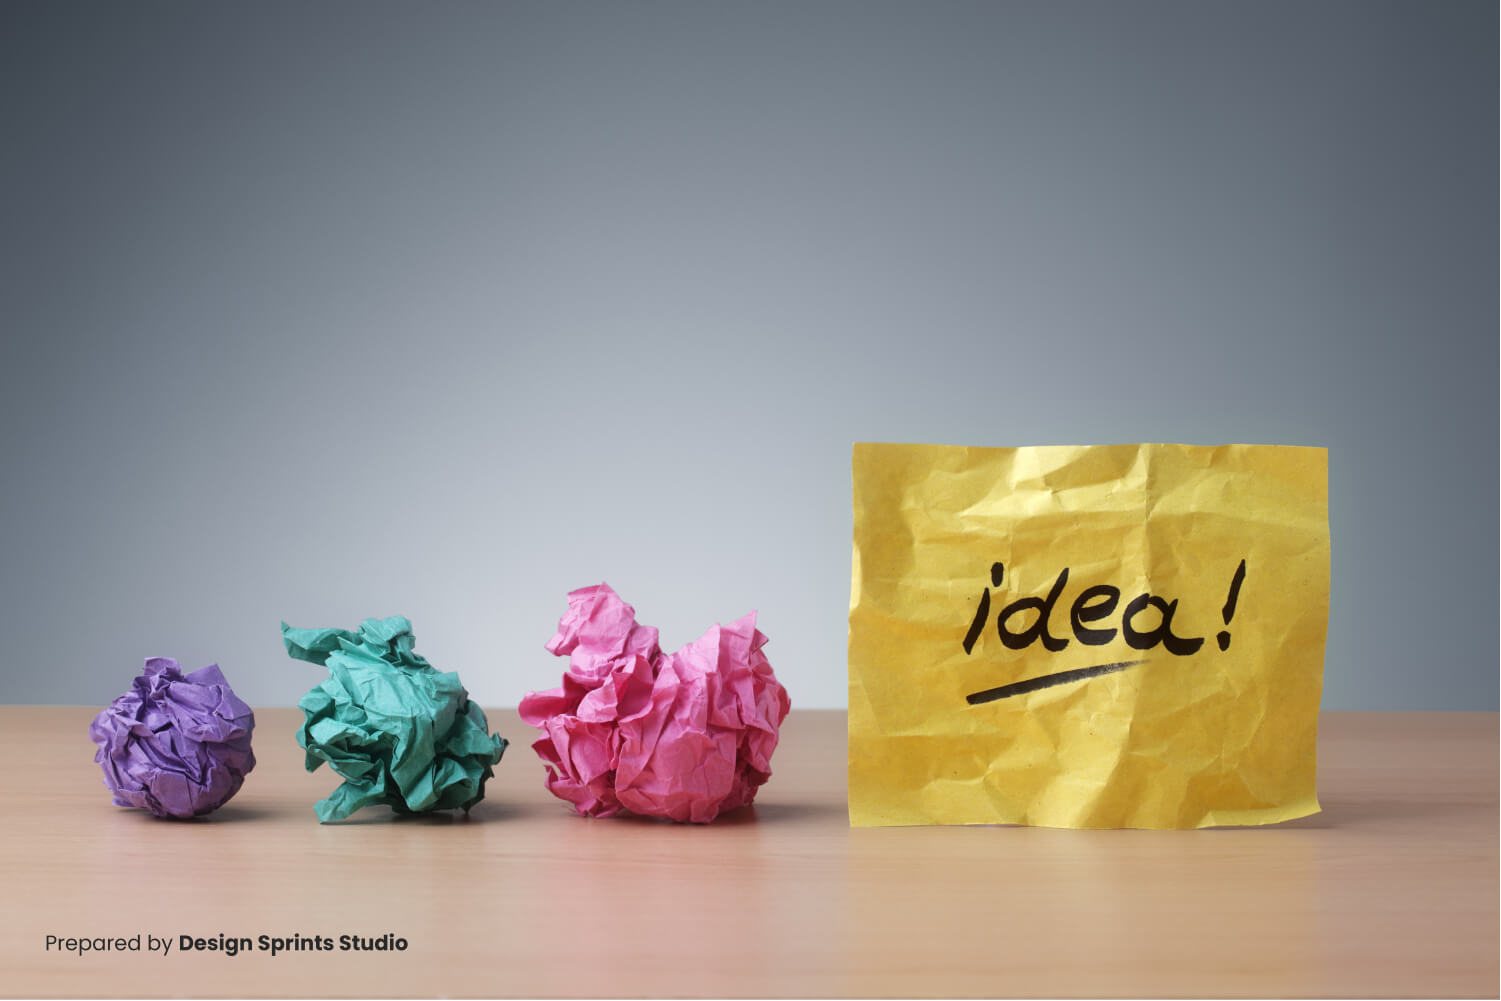 What are the Benefits of an Innovation Workshop